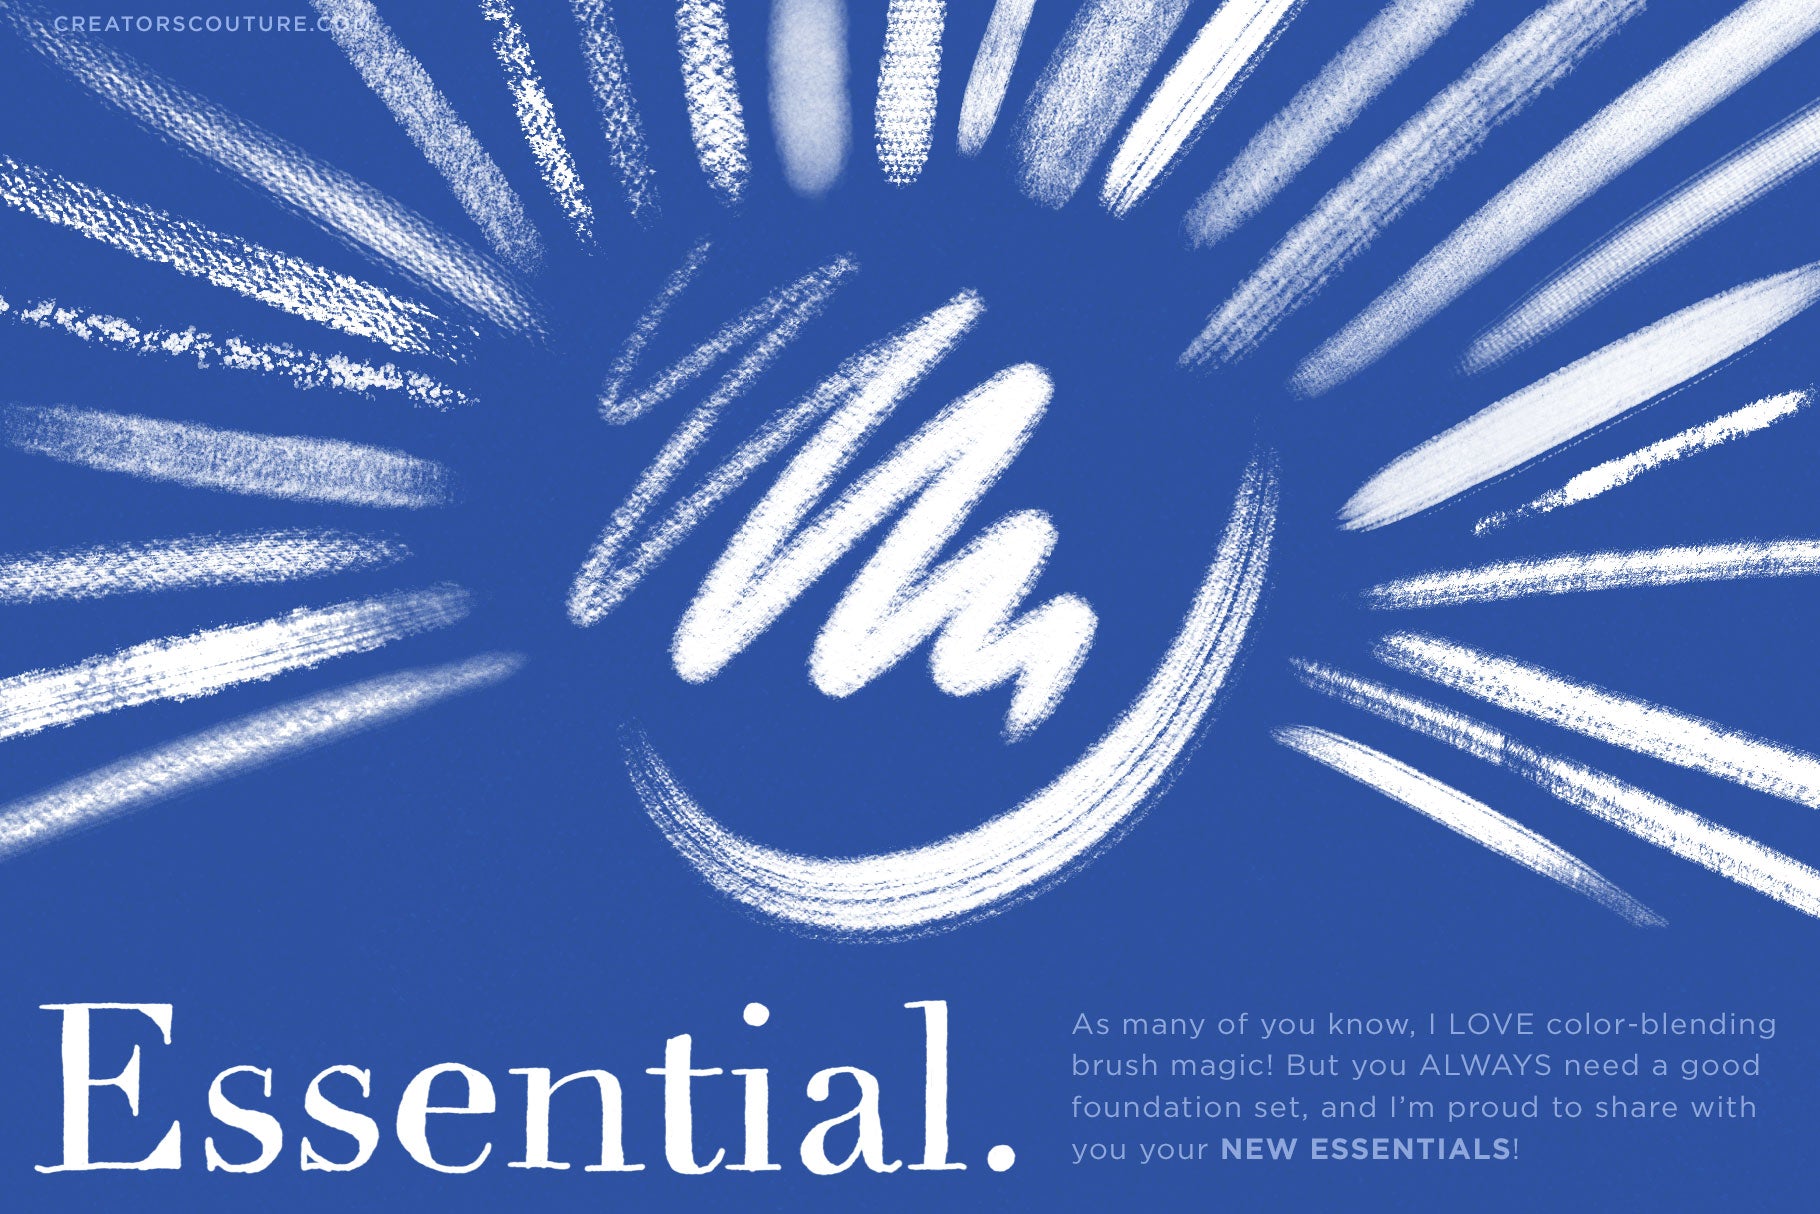 Brushwerk Your New Essential Fashion-Inspired Photoshop Brushes, preview of white textured brush strokes on blue